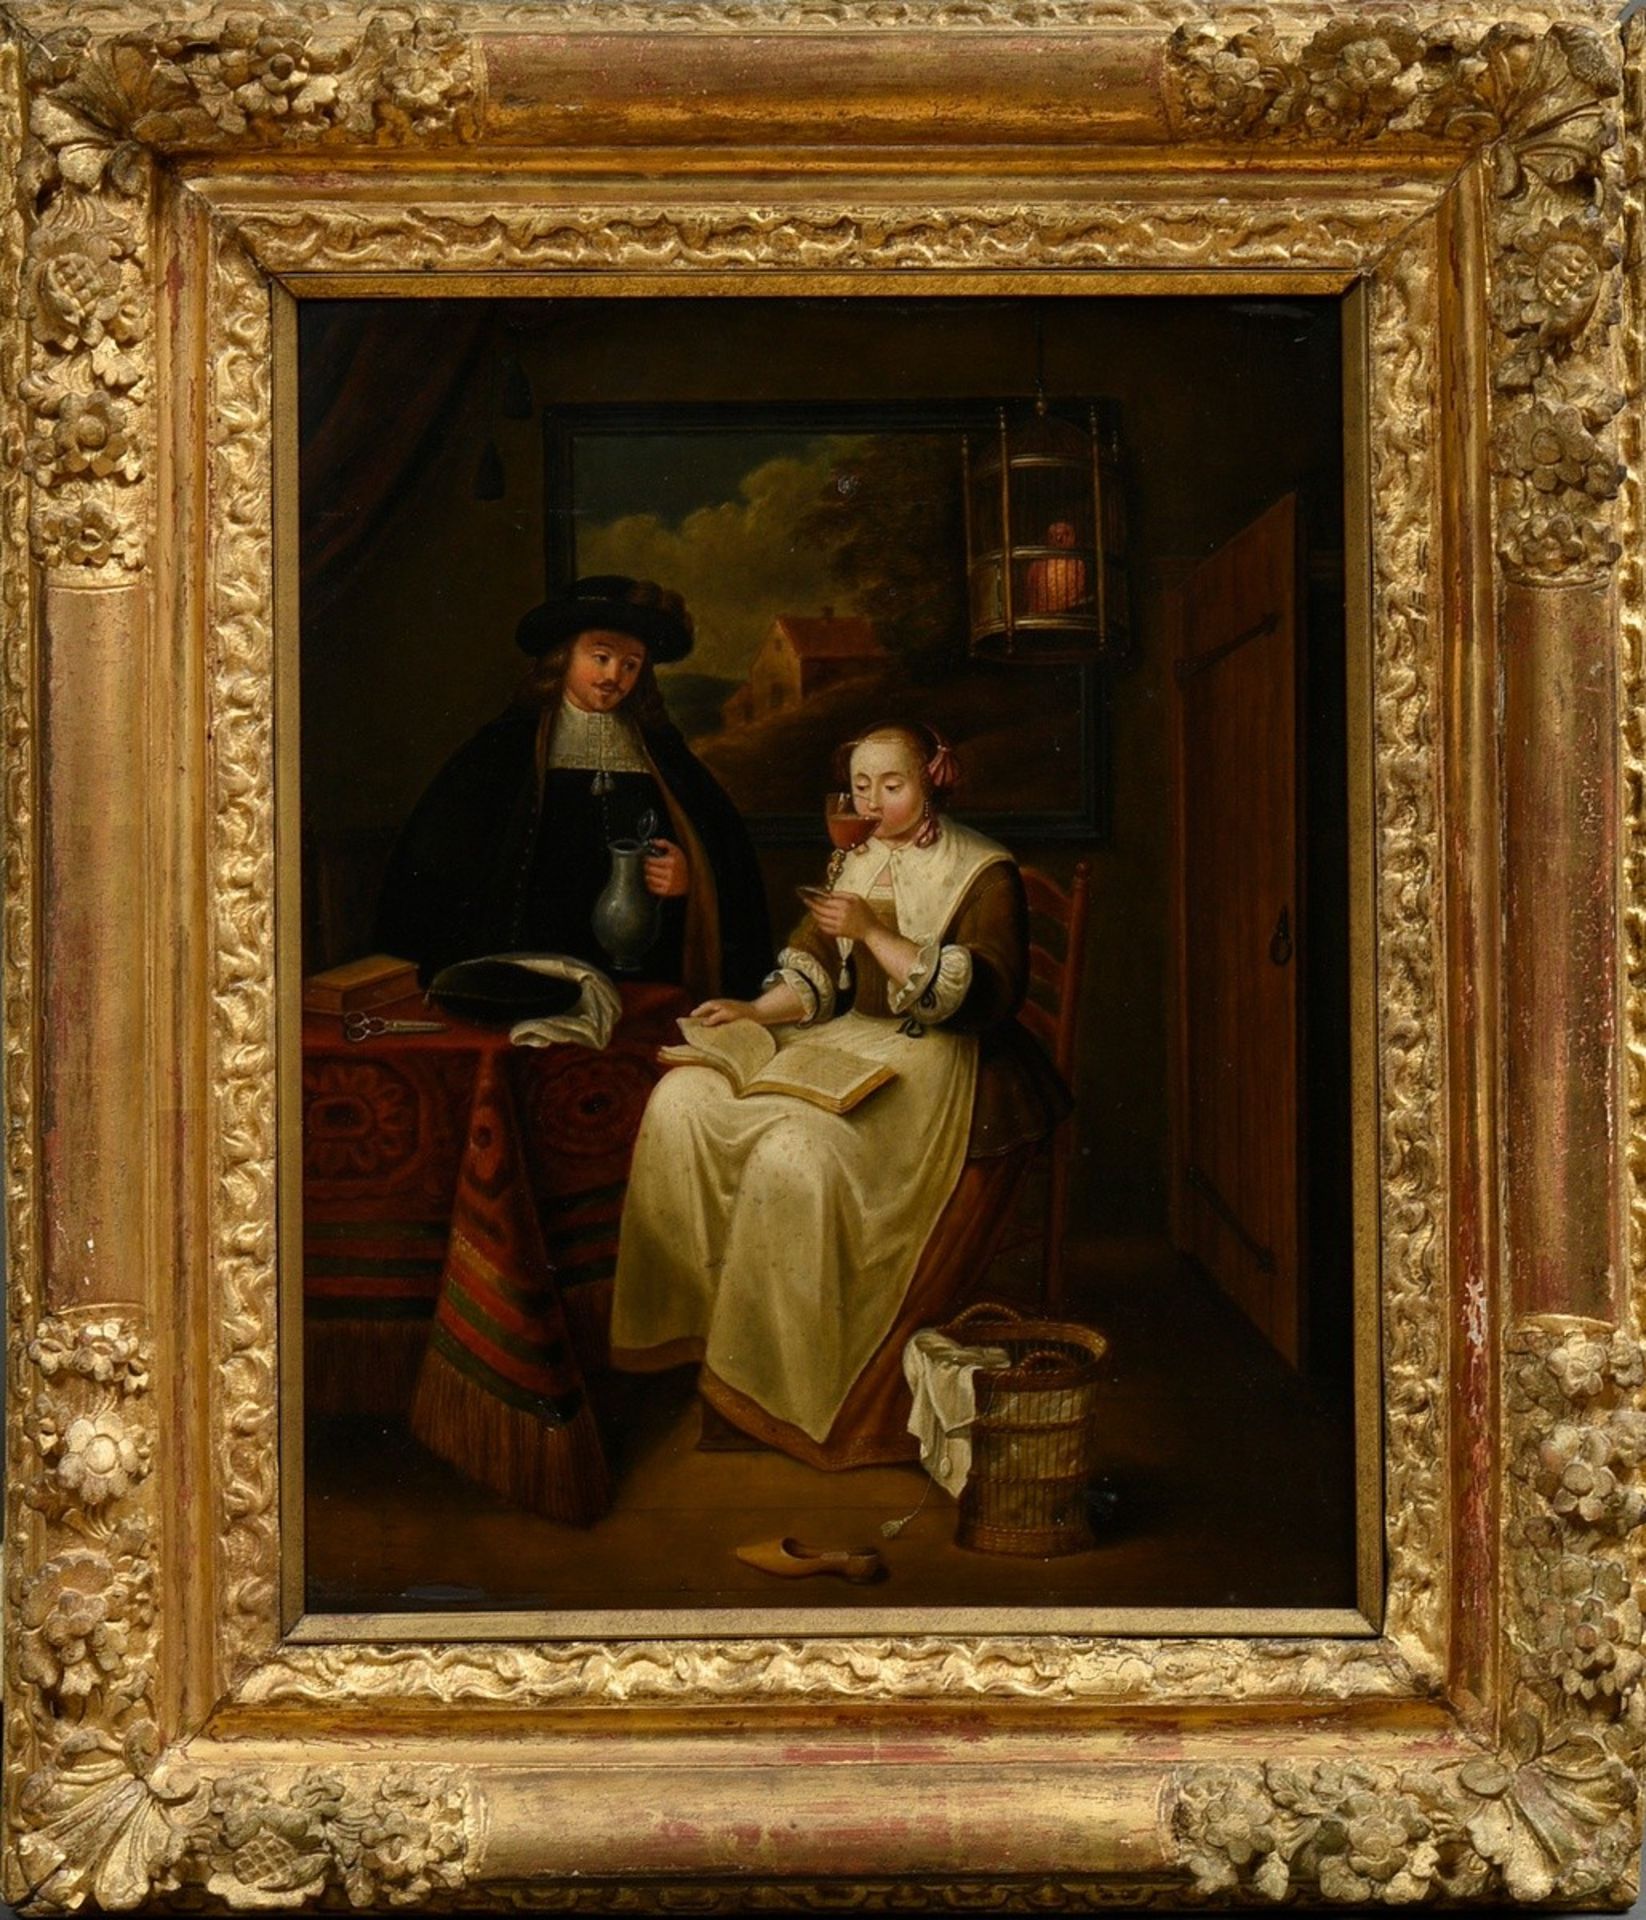 Unknown artist of the 18th c. "Dutch interior scene with couple at wine tasting", oil/wood, magnifi - Image 2 of 8